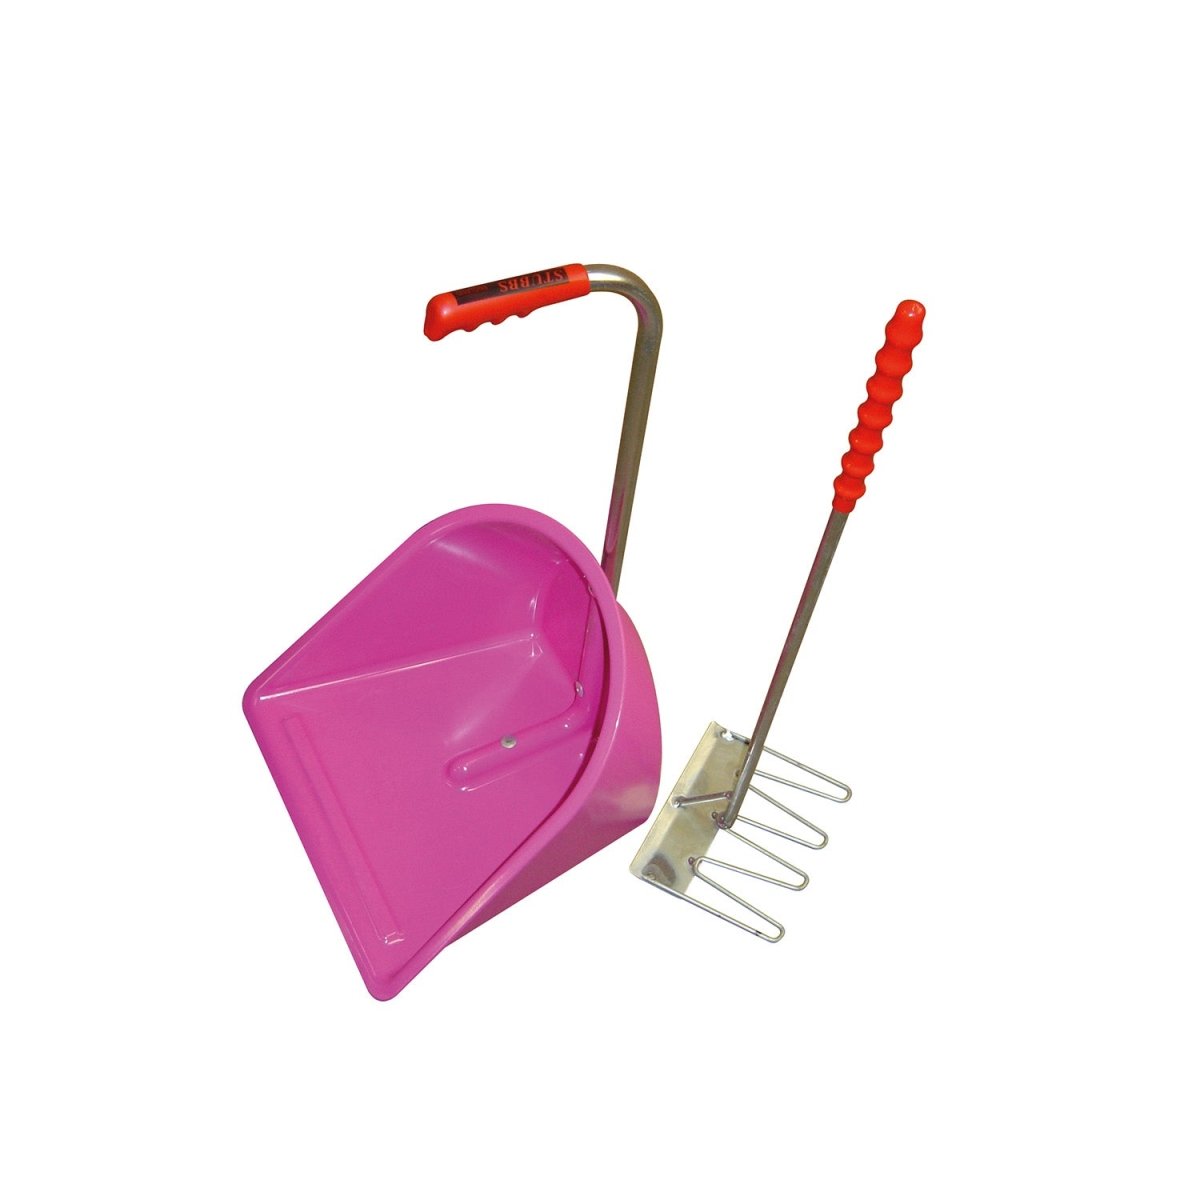 Stubbs Stable Mate Manure Collector with Rake - Pink -